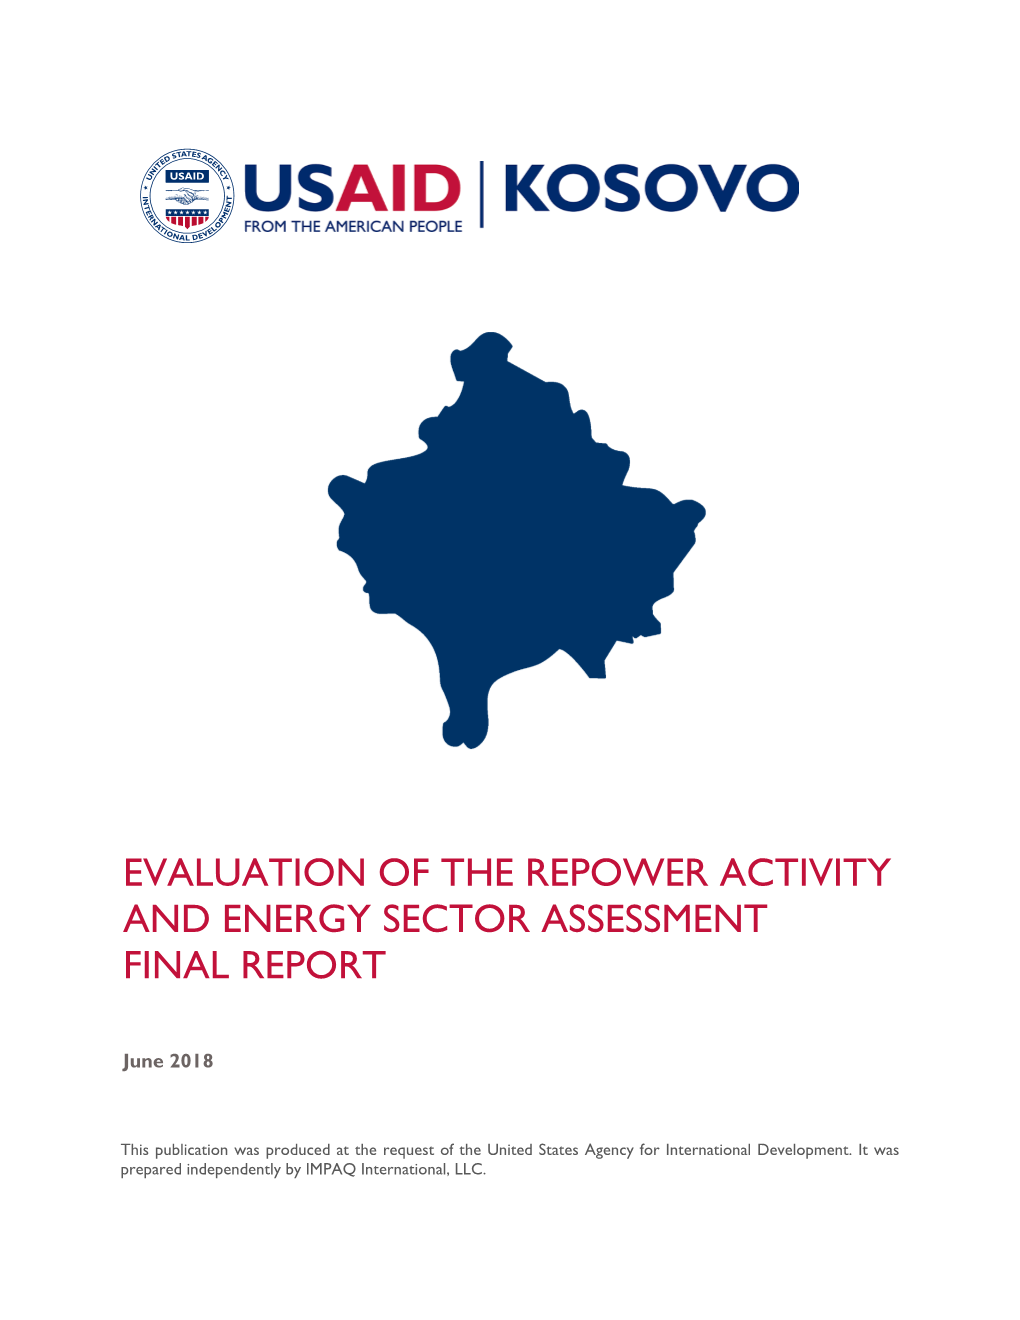 Evaluation of the Repower Activity and Energy Sector Assessment Final Report